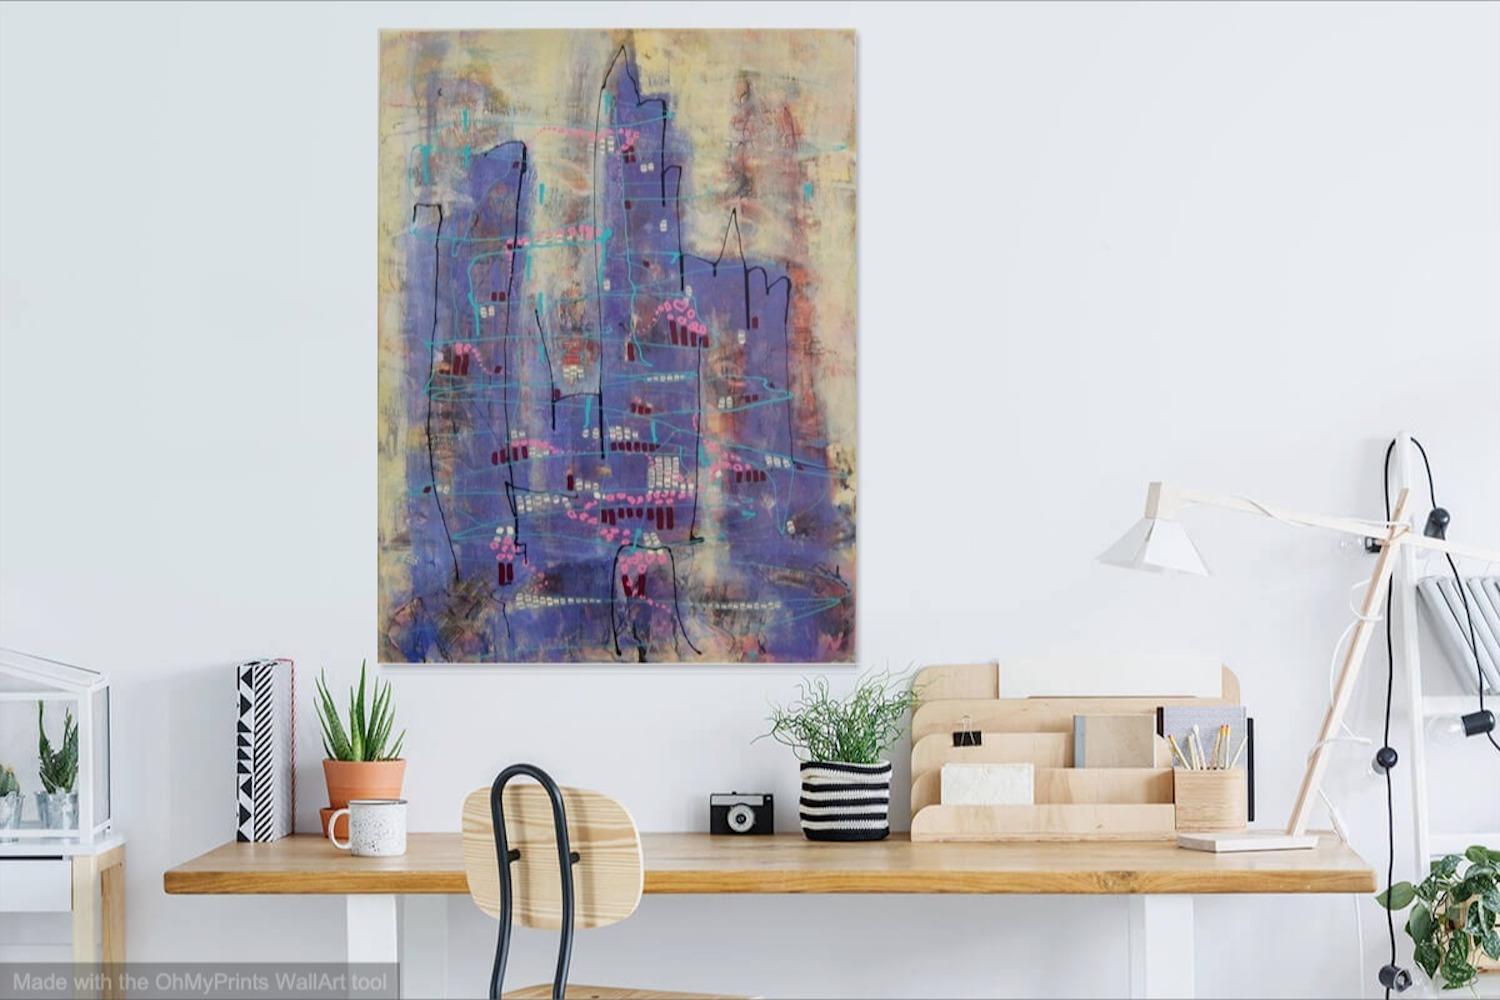 Whimsical fantasy city mood abstract painting on canvas original art, a surreal metropolis artwork with gestural lines, collage and etchings